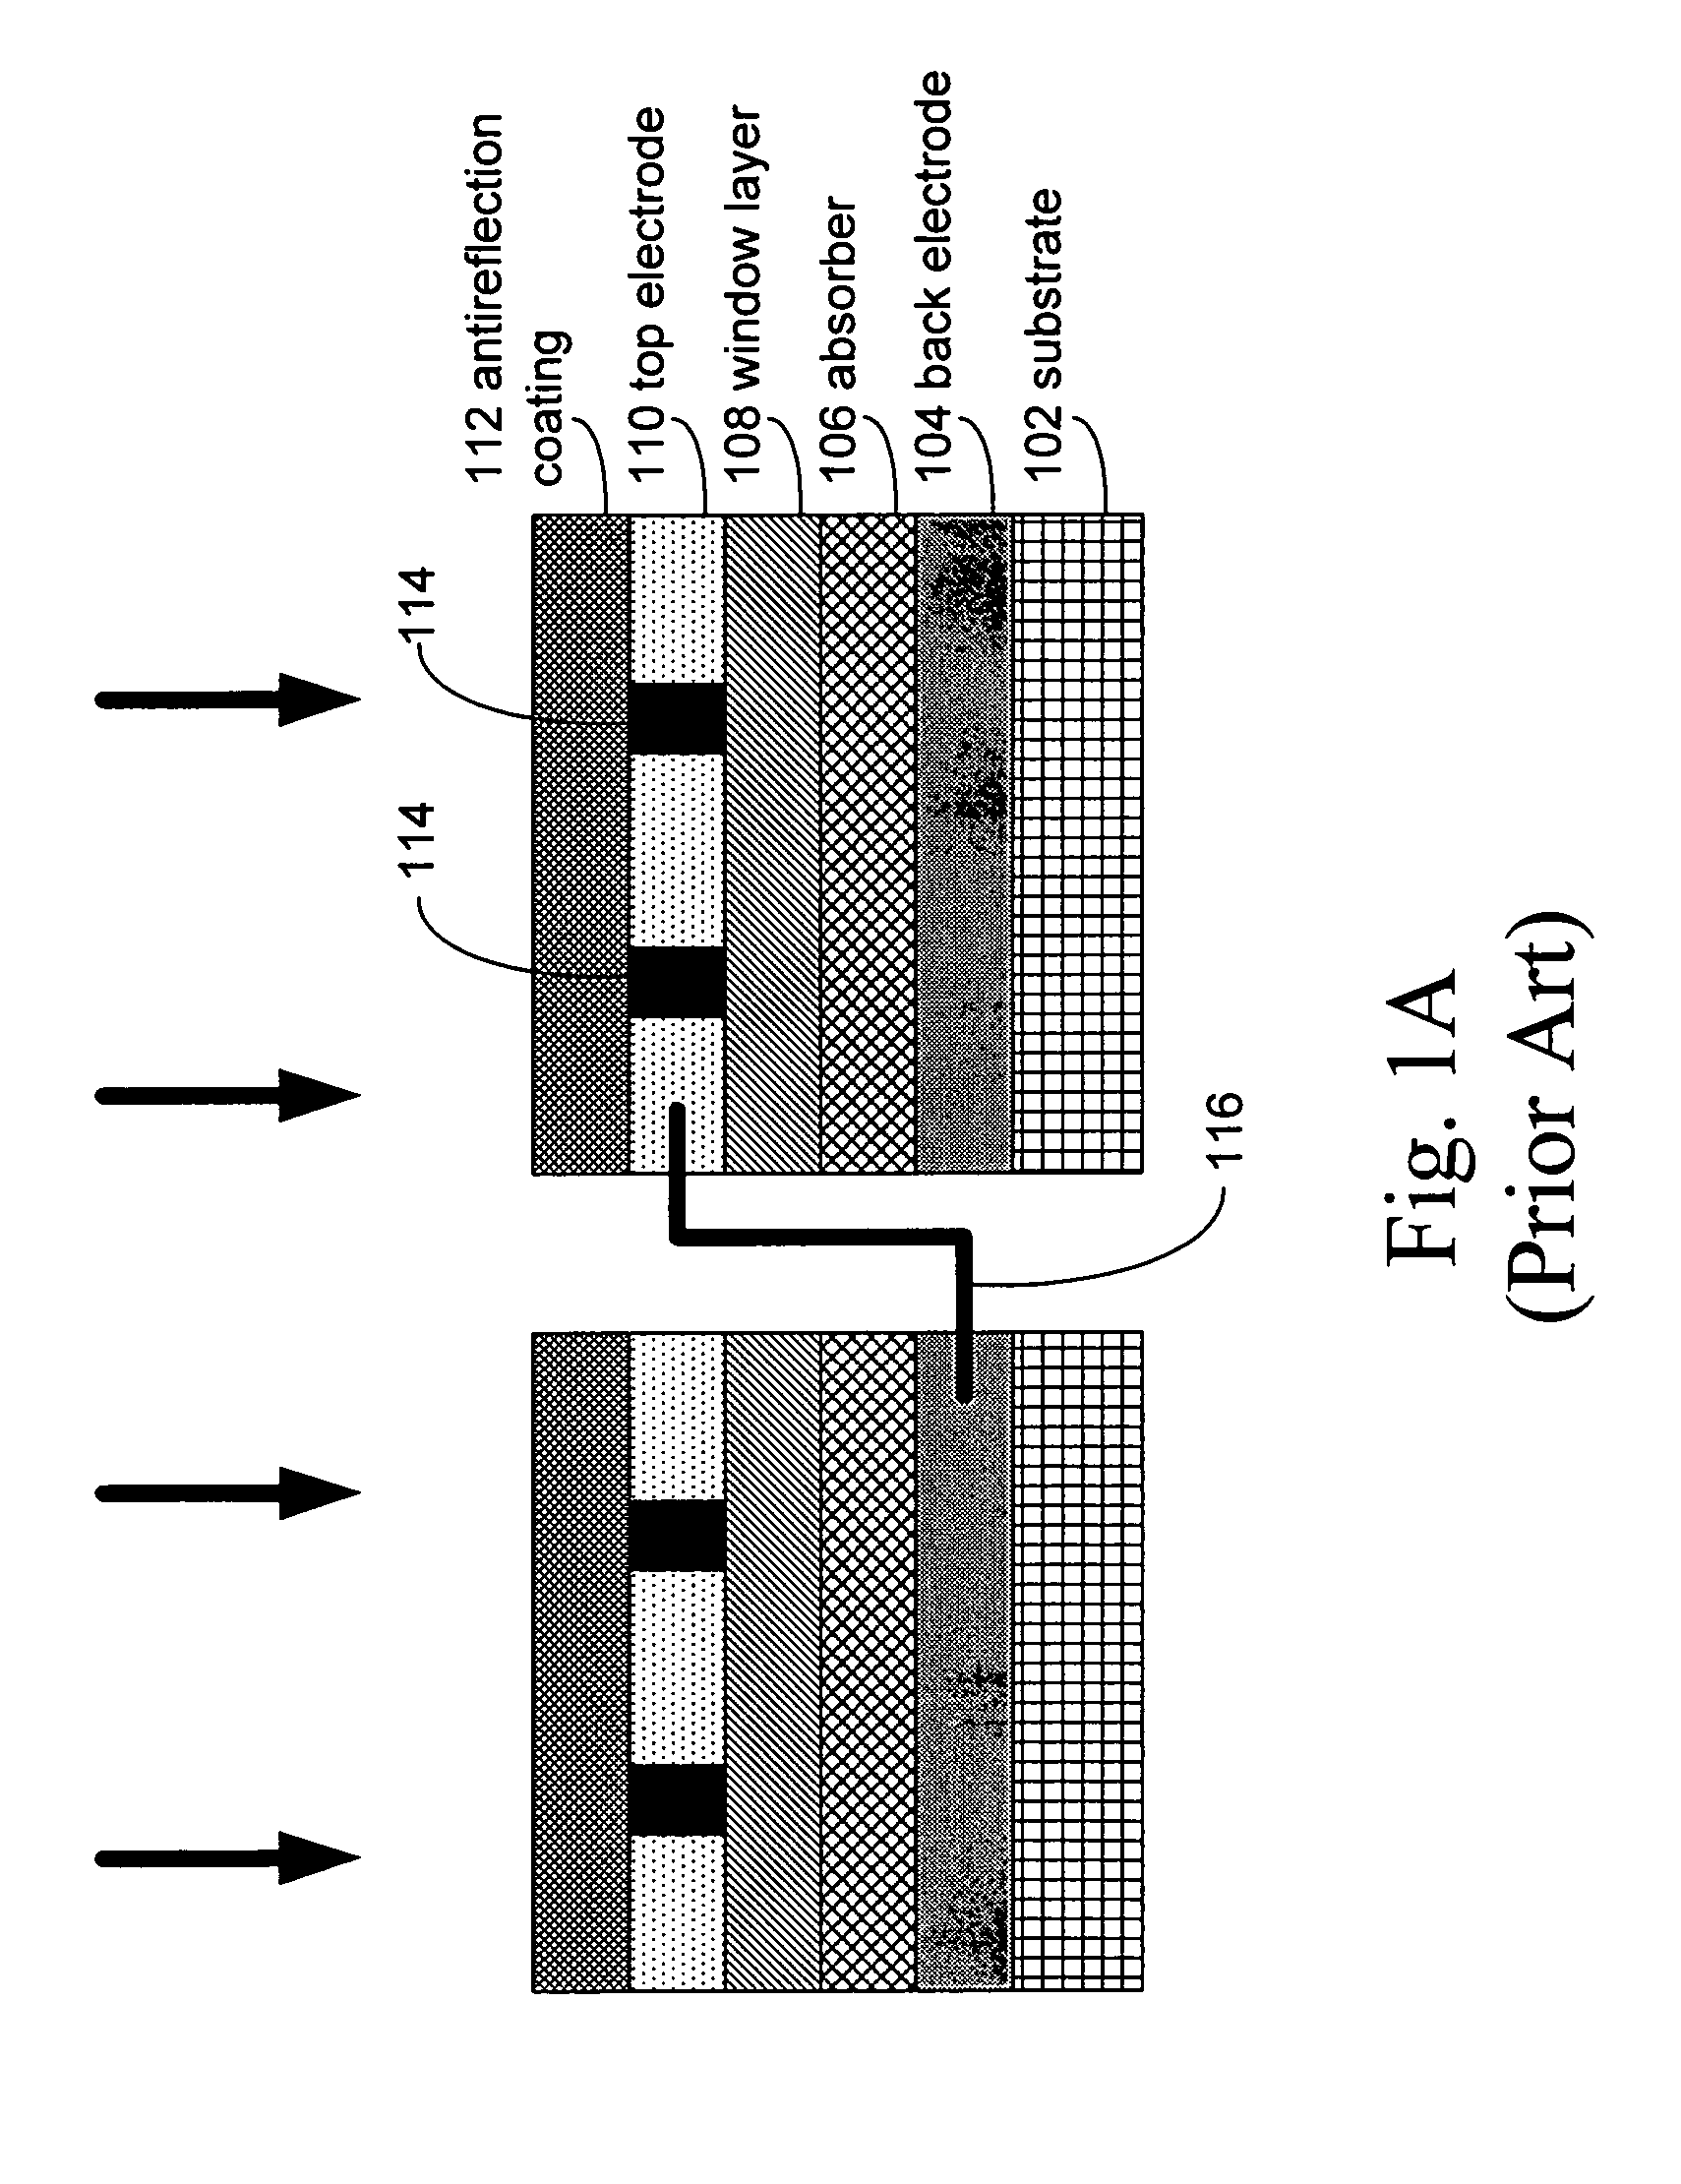 Assemblies of cylindrical solar units with internal spacing